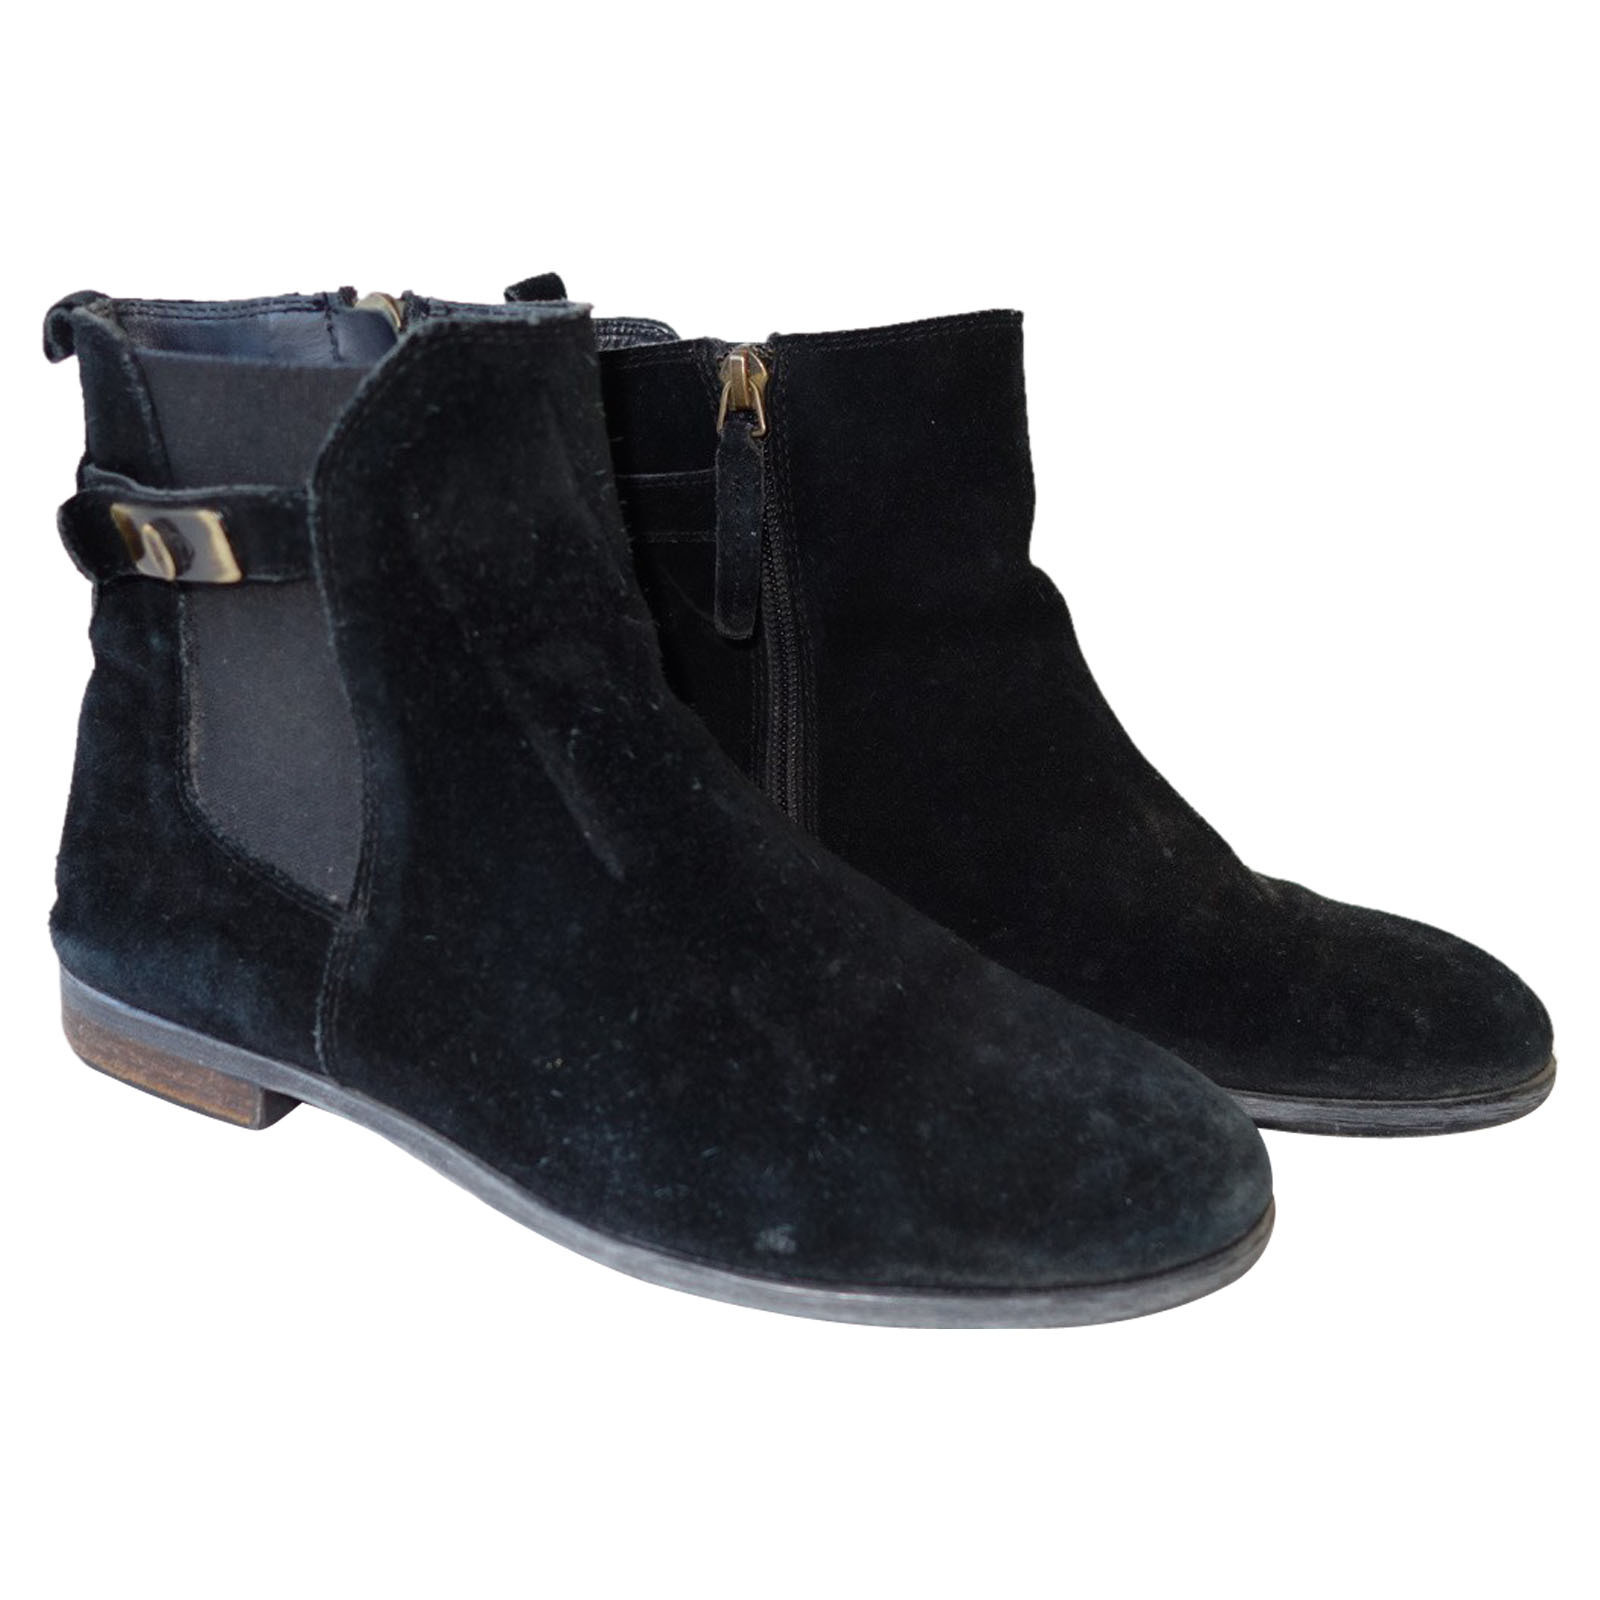 Tommy Hilfiger Ankle boots Suede in Black - Second Hand Tommy Hilfiger  Ankle boots Suede in Black buy used for 69€ (4141202)